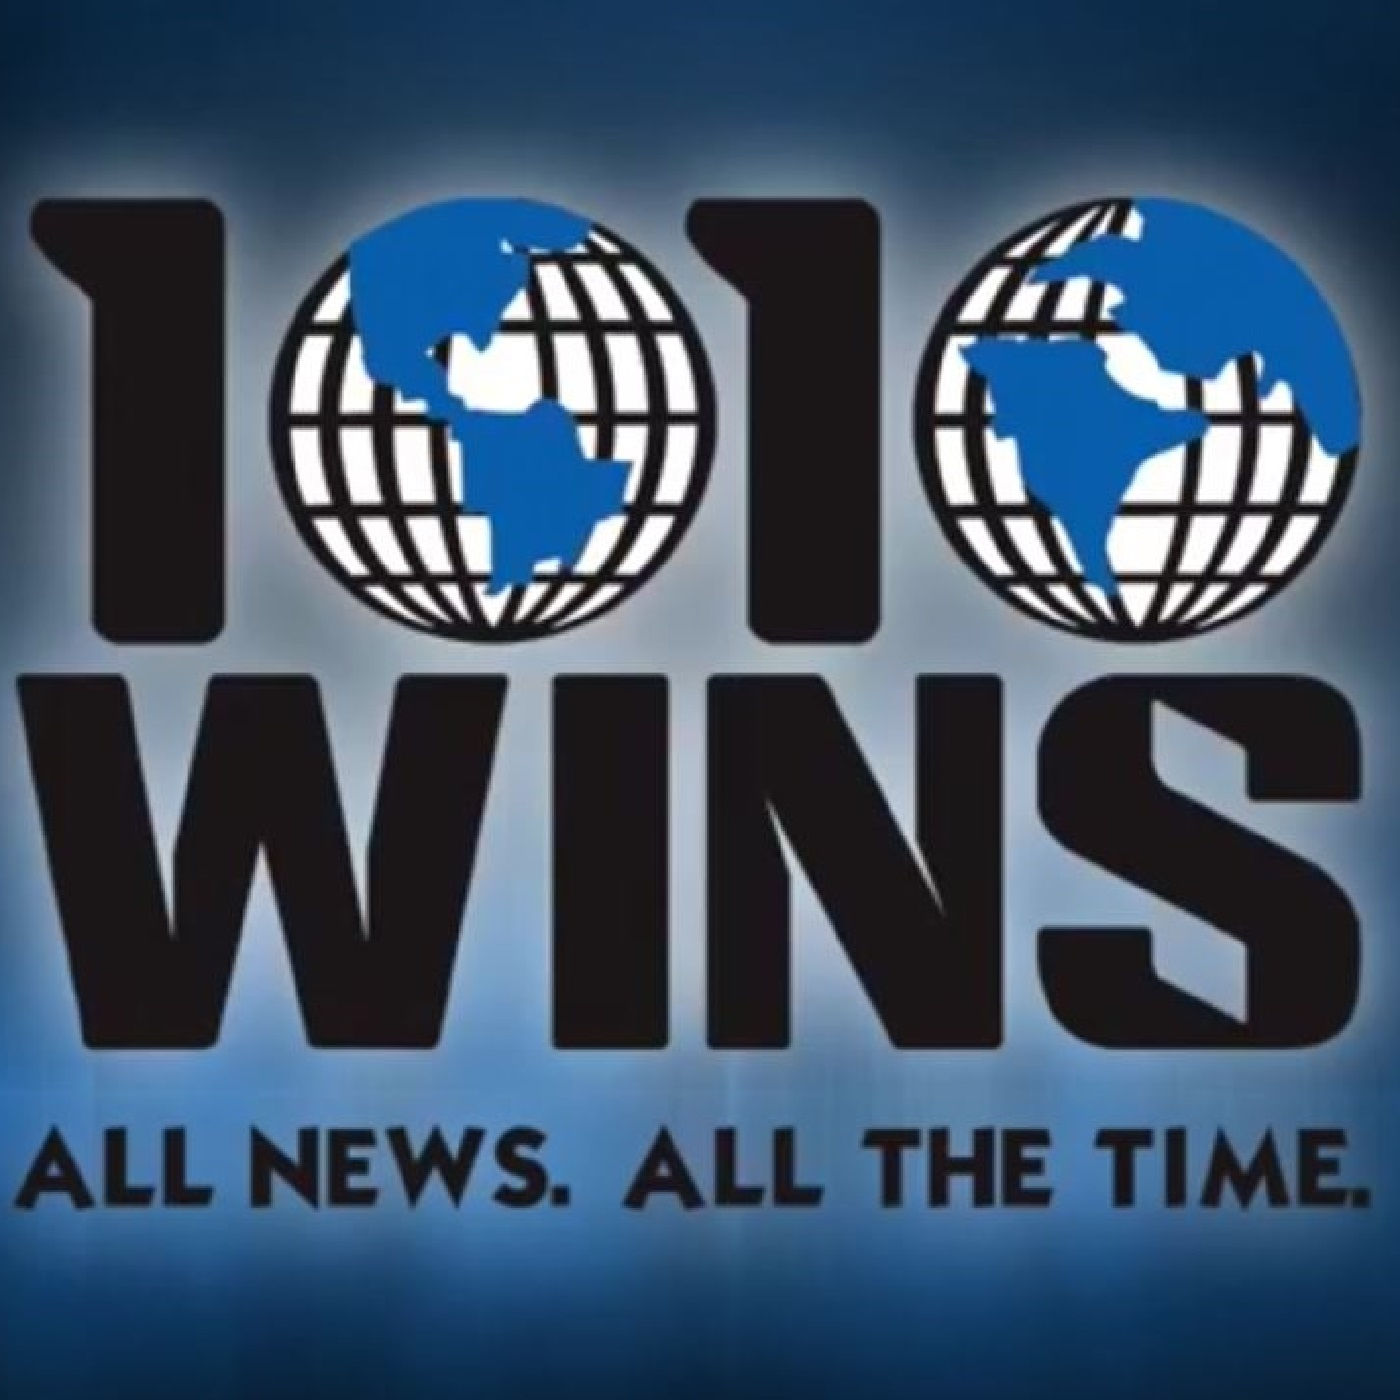 1010 WINS AWARDS SUBMISSIONS